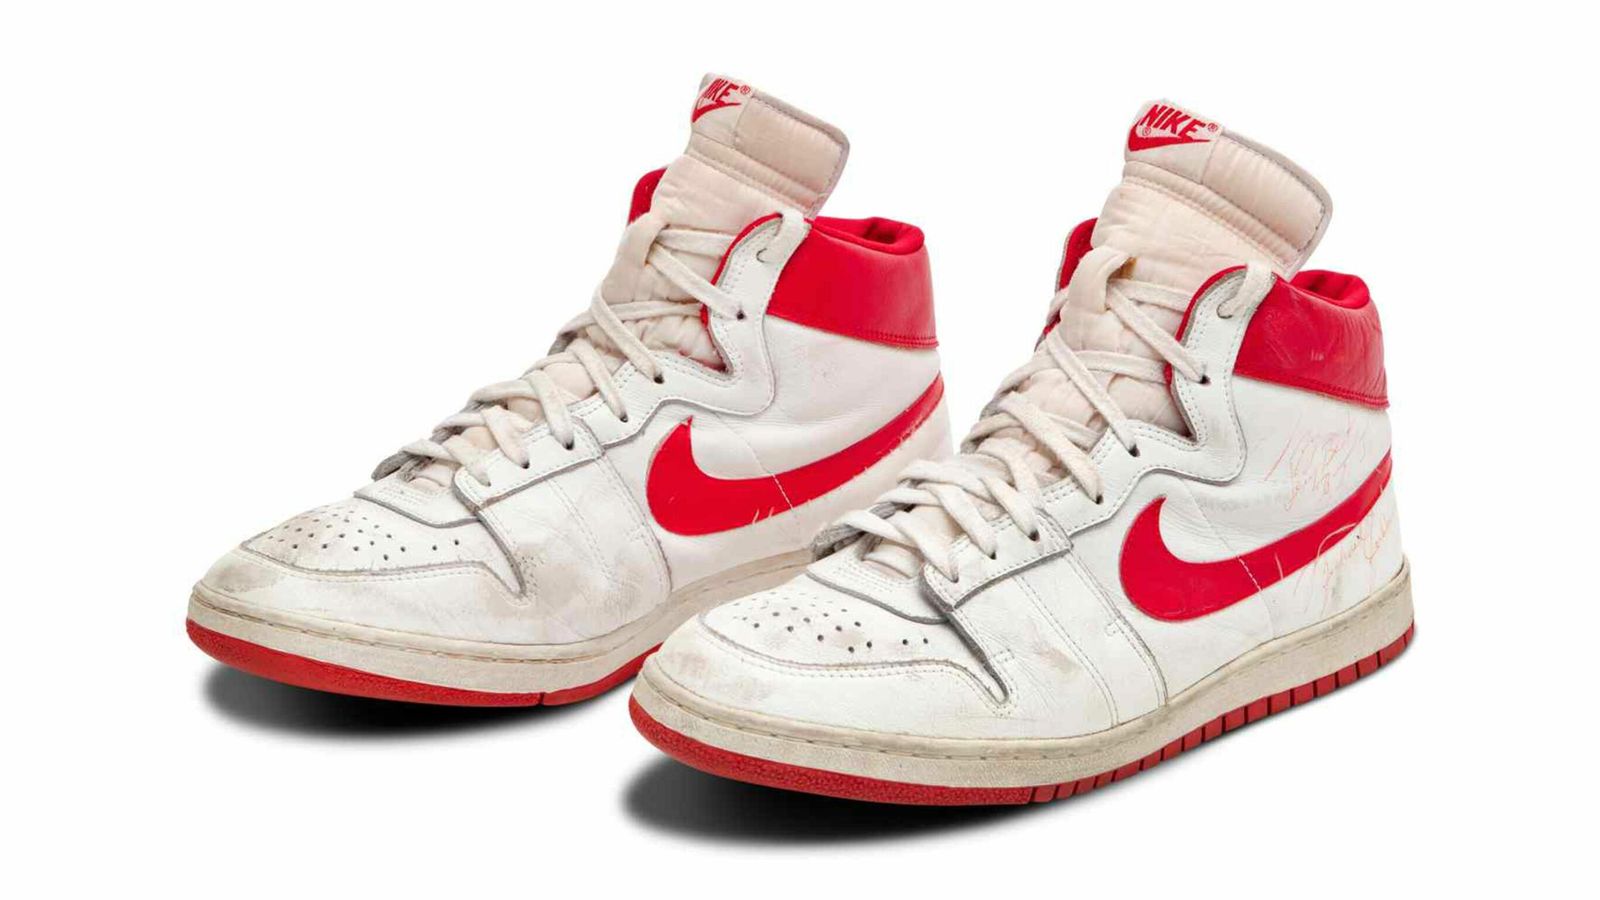 Michael Jordan's 1984 Nike Air Ship trainers break records after selling  for $1.42m, Ents & Arts News